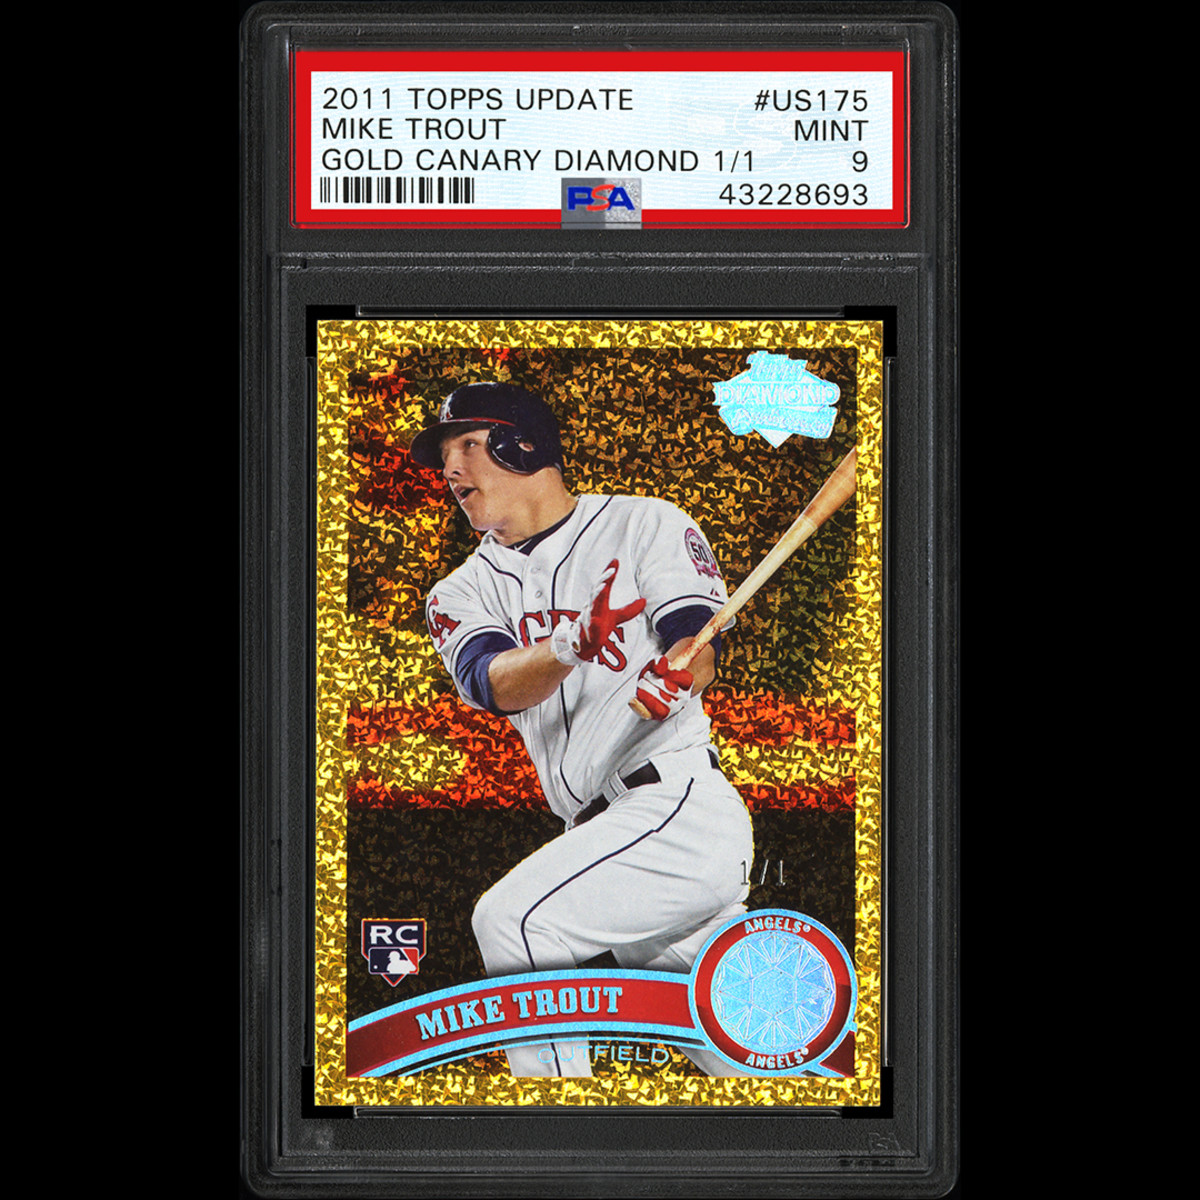 History of baseball card grading shows rise of PSA, BGS and SGC ...